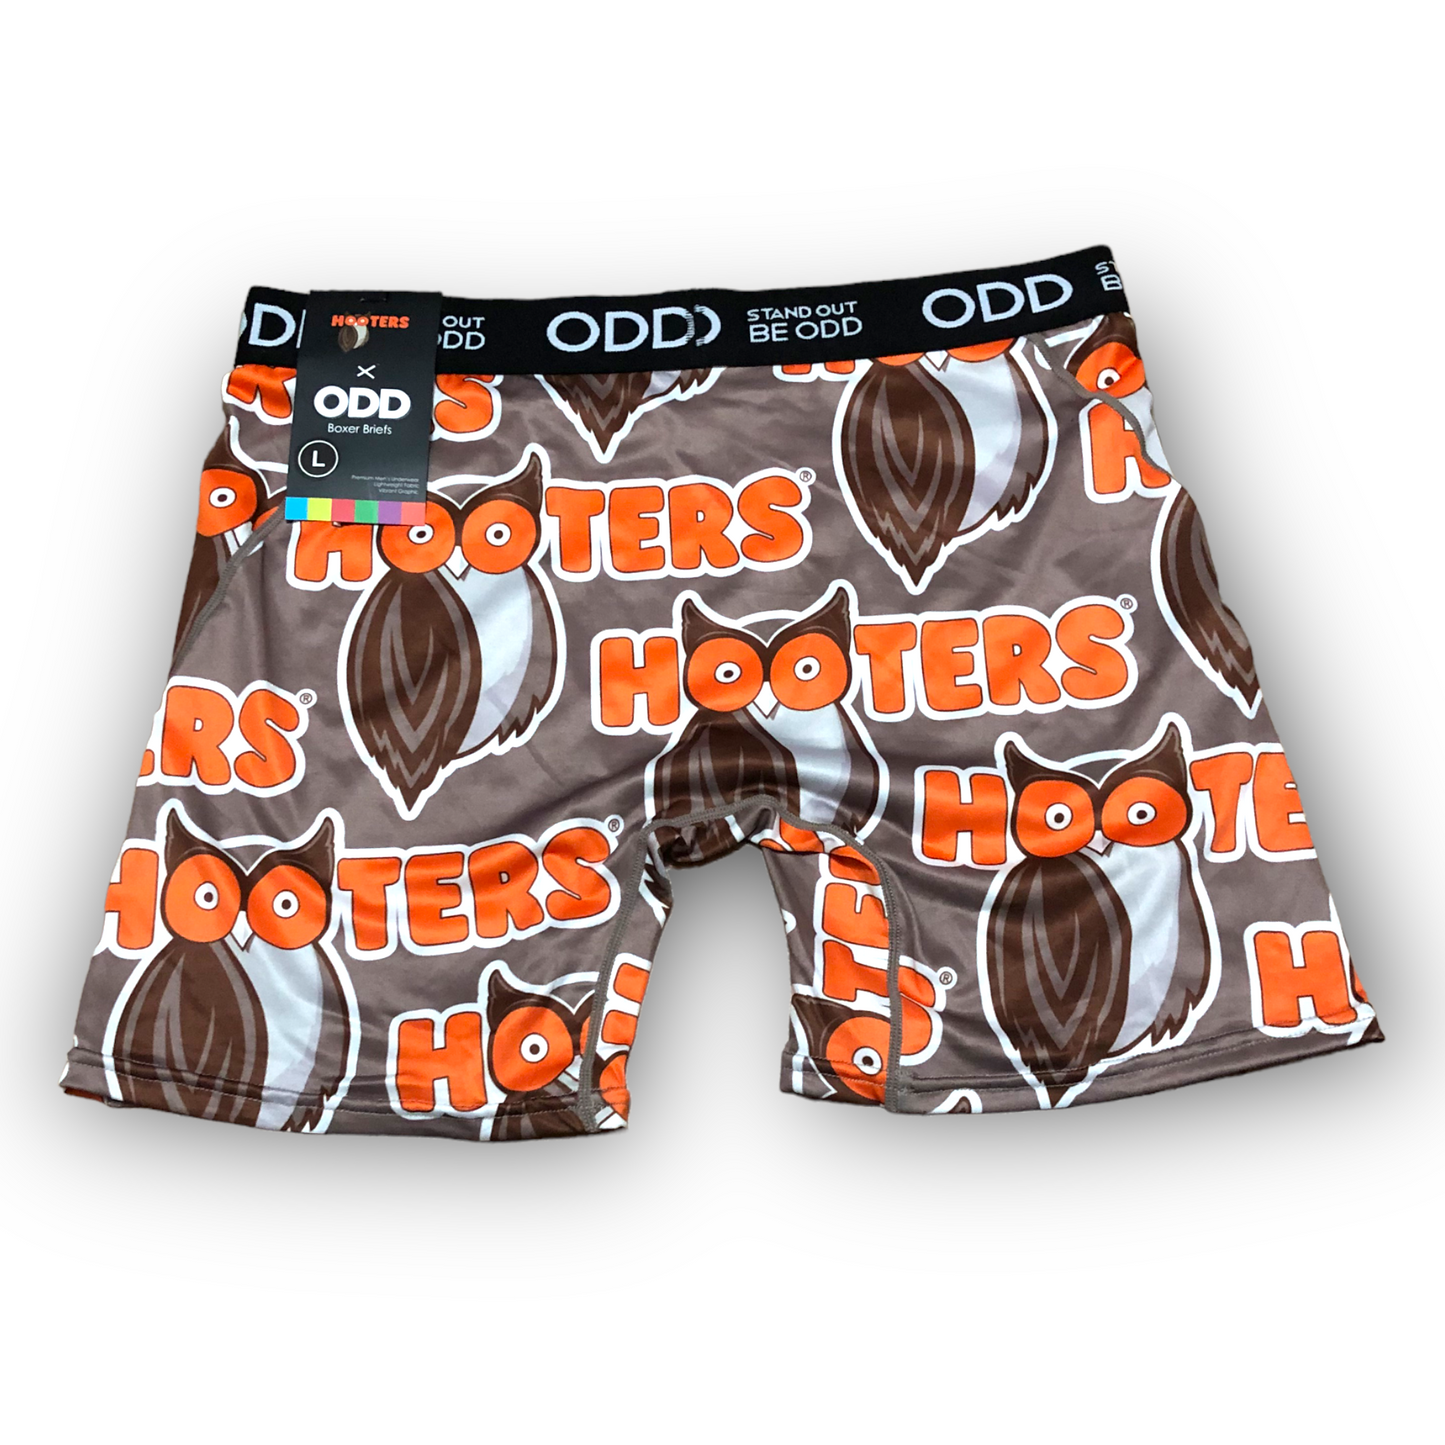 Odd by Odd Sox Men's Hooters Boxer Briefs